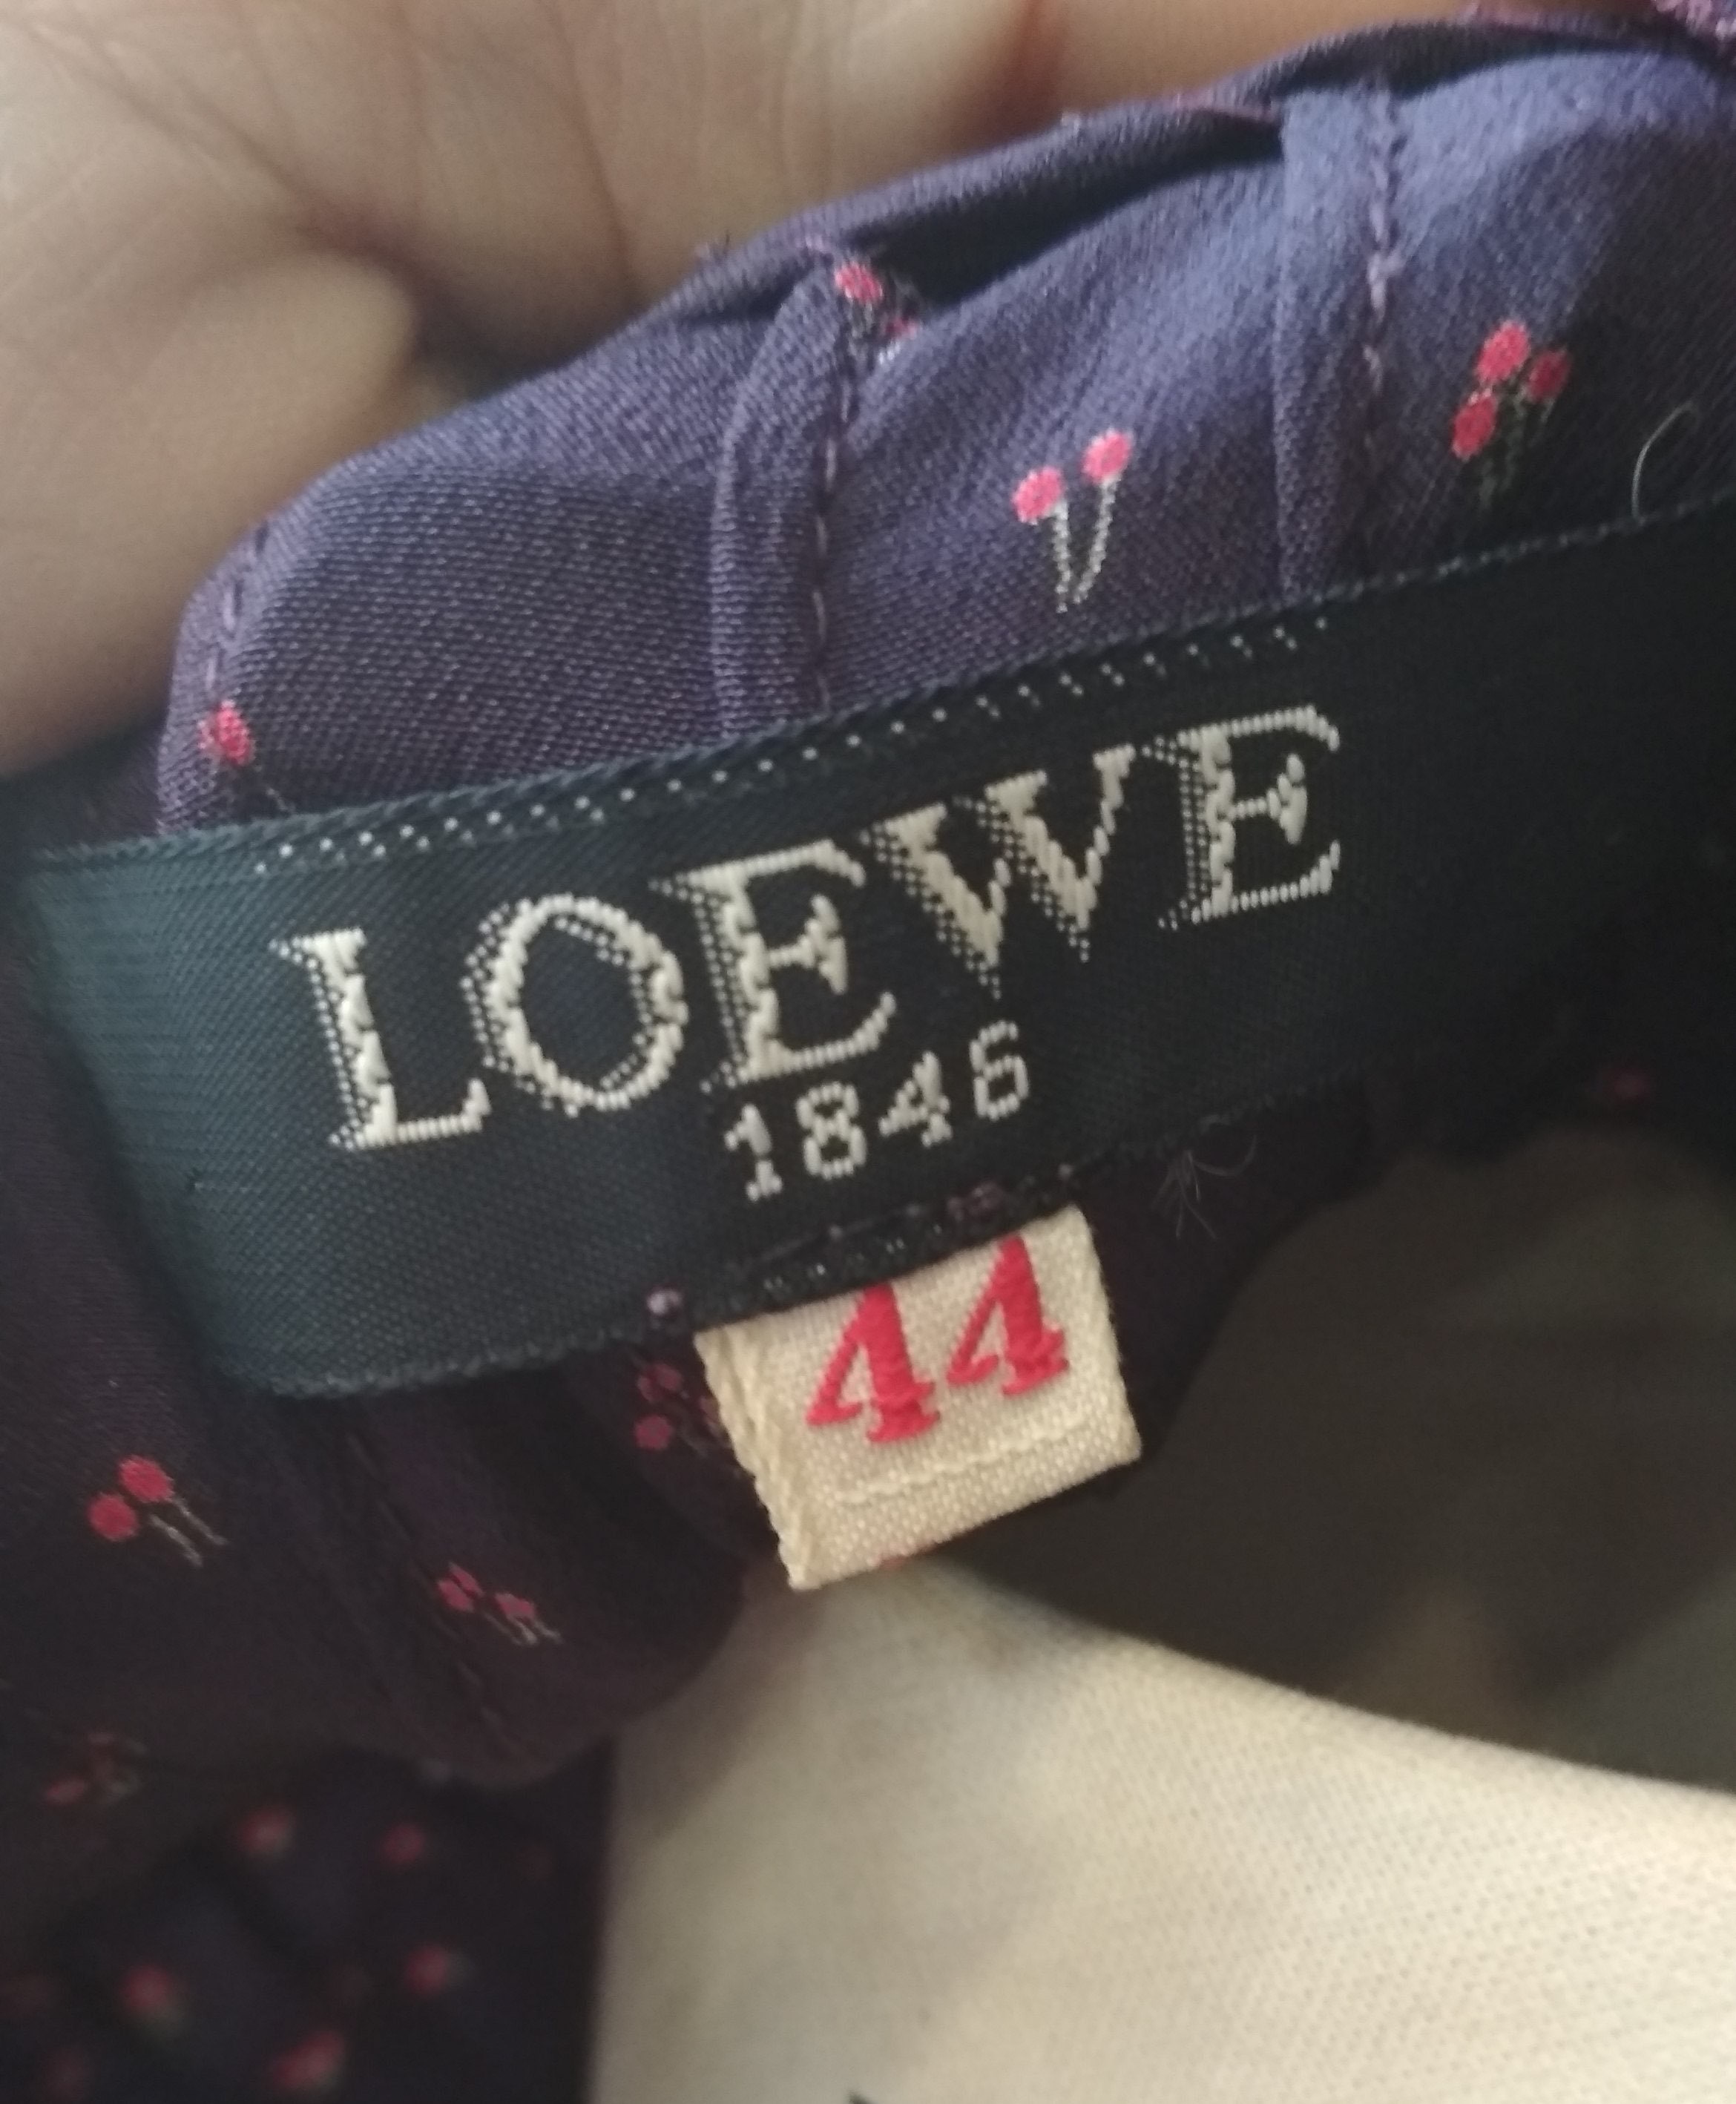 But Loewe if you want to collab for real HMU 😆🧩🫶🏽 #loewe #puzzleba... |  TikTok